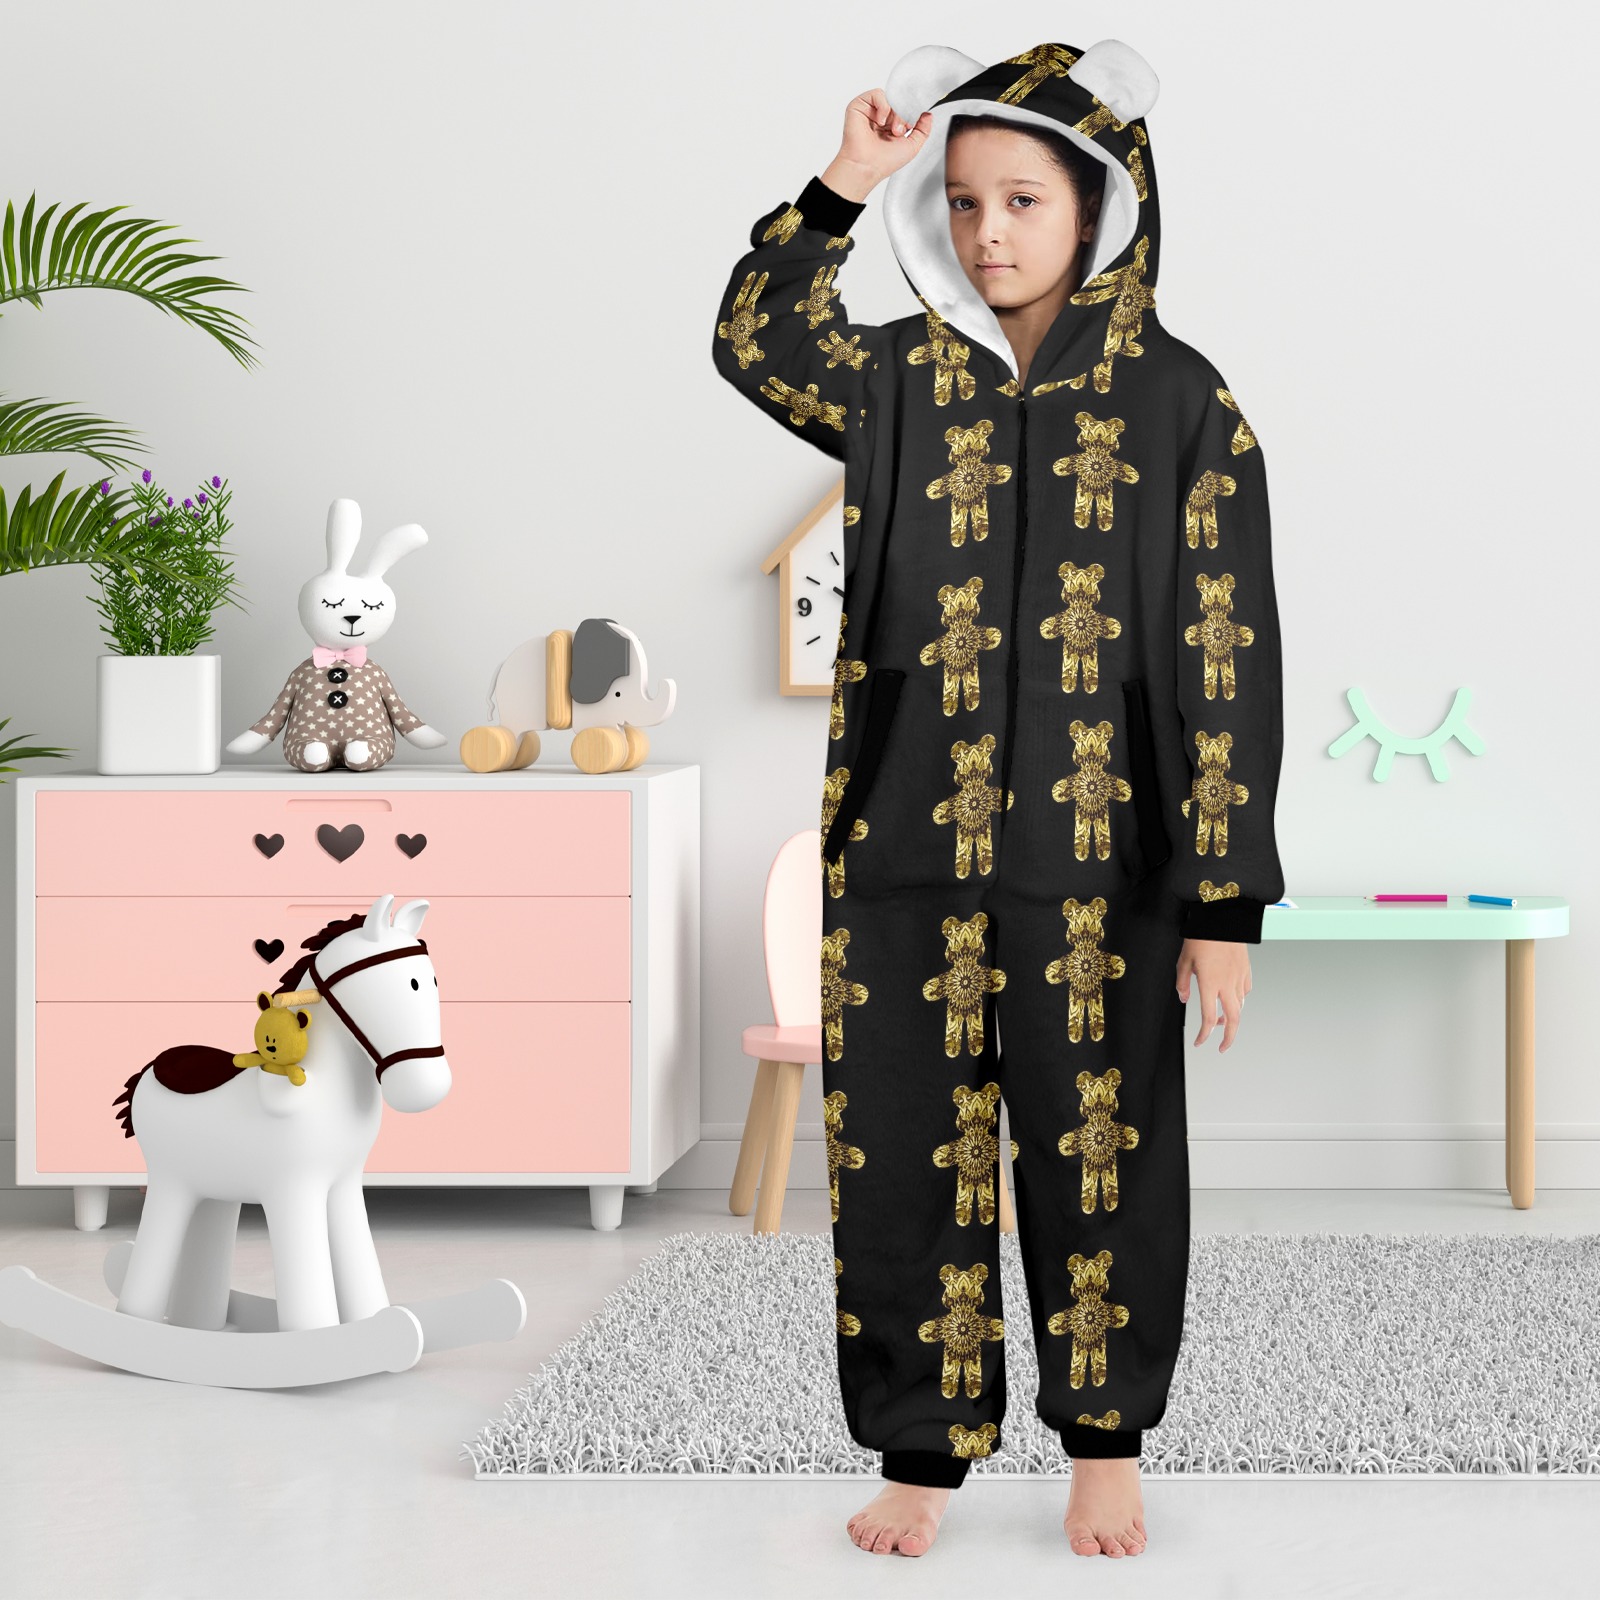 nounours 1h One-Piece Zip Up Hooded Pajamas for Big Kids